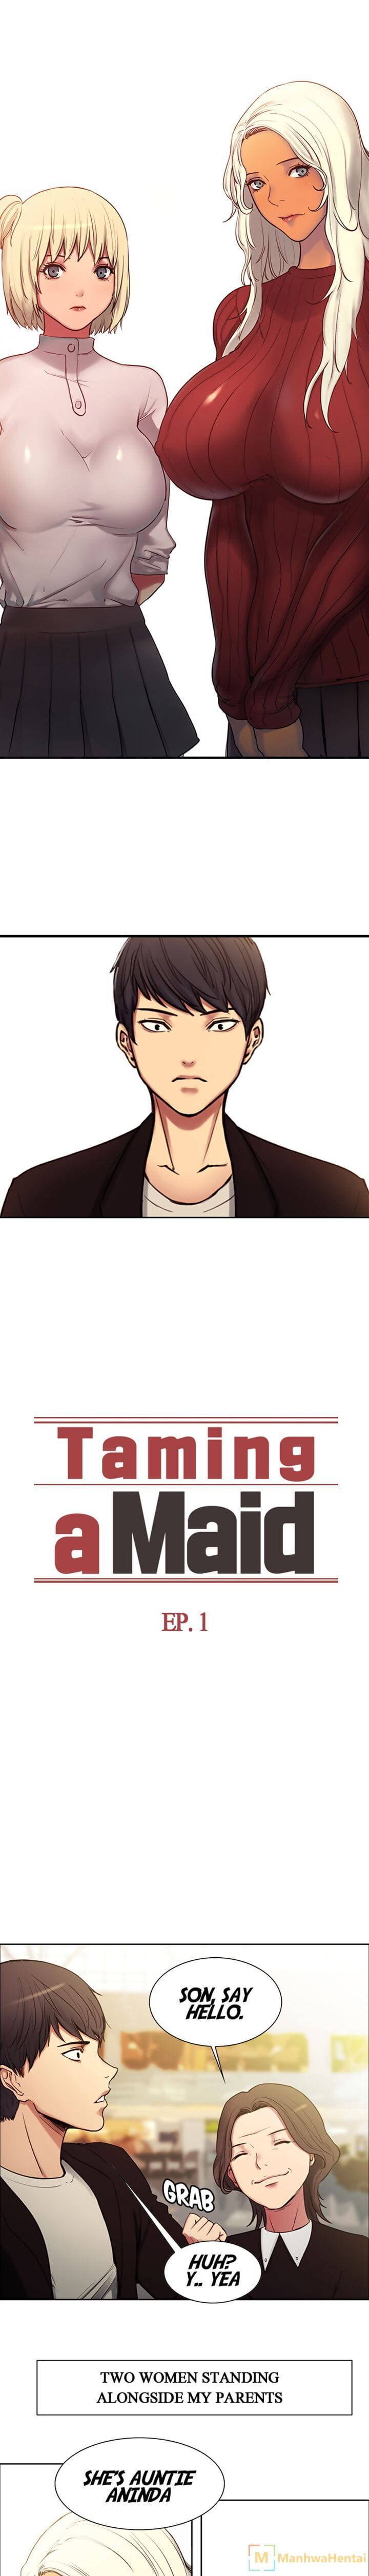 Serious Taming a Maid/Domesticate the Housekeeper Chapter 1 English